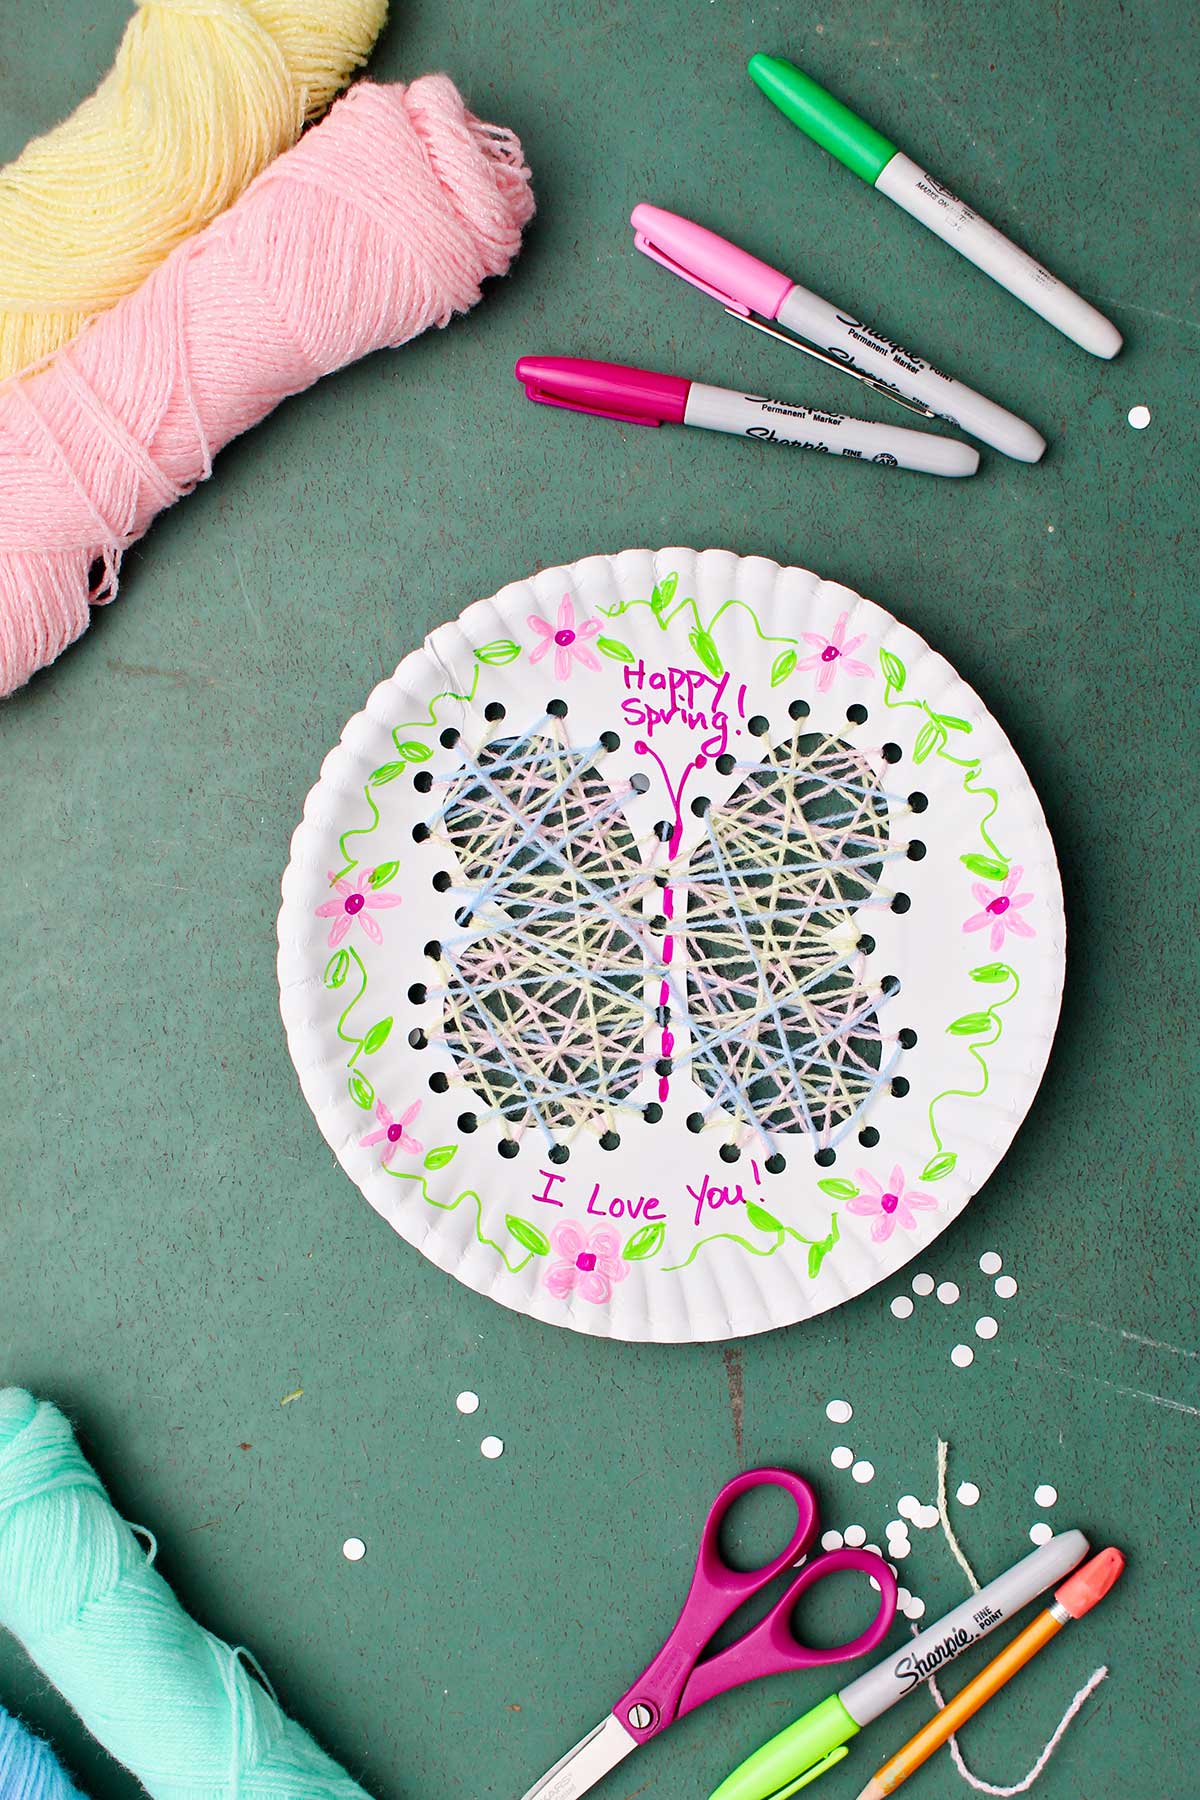 Completed Paper Plate String Art of a butterfly with flower decorations and "Happy Spring" "I Love You!" written on the plate.